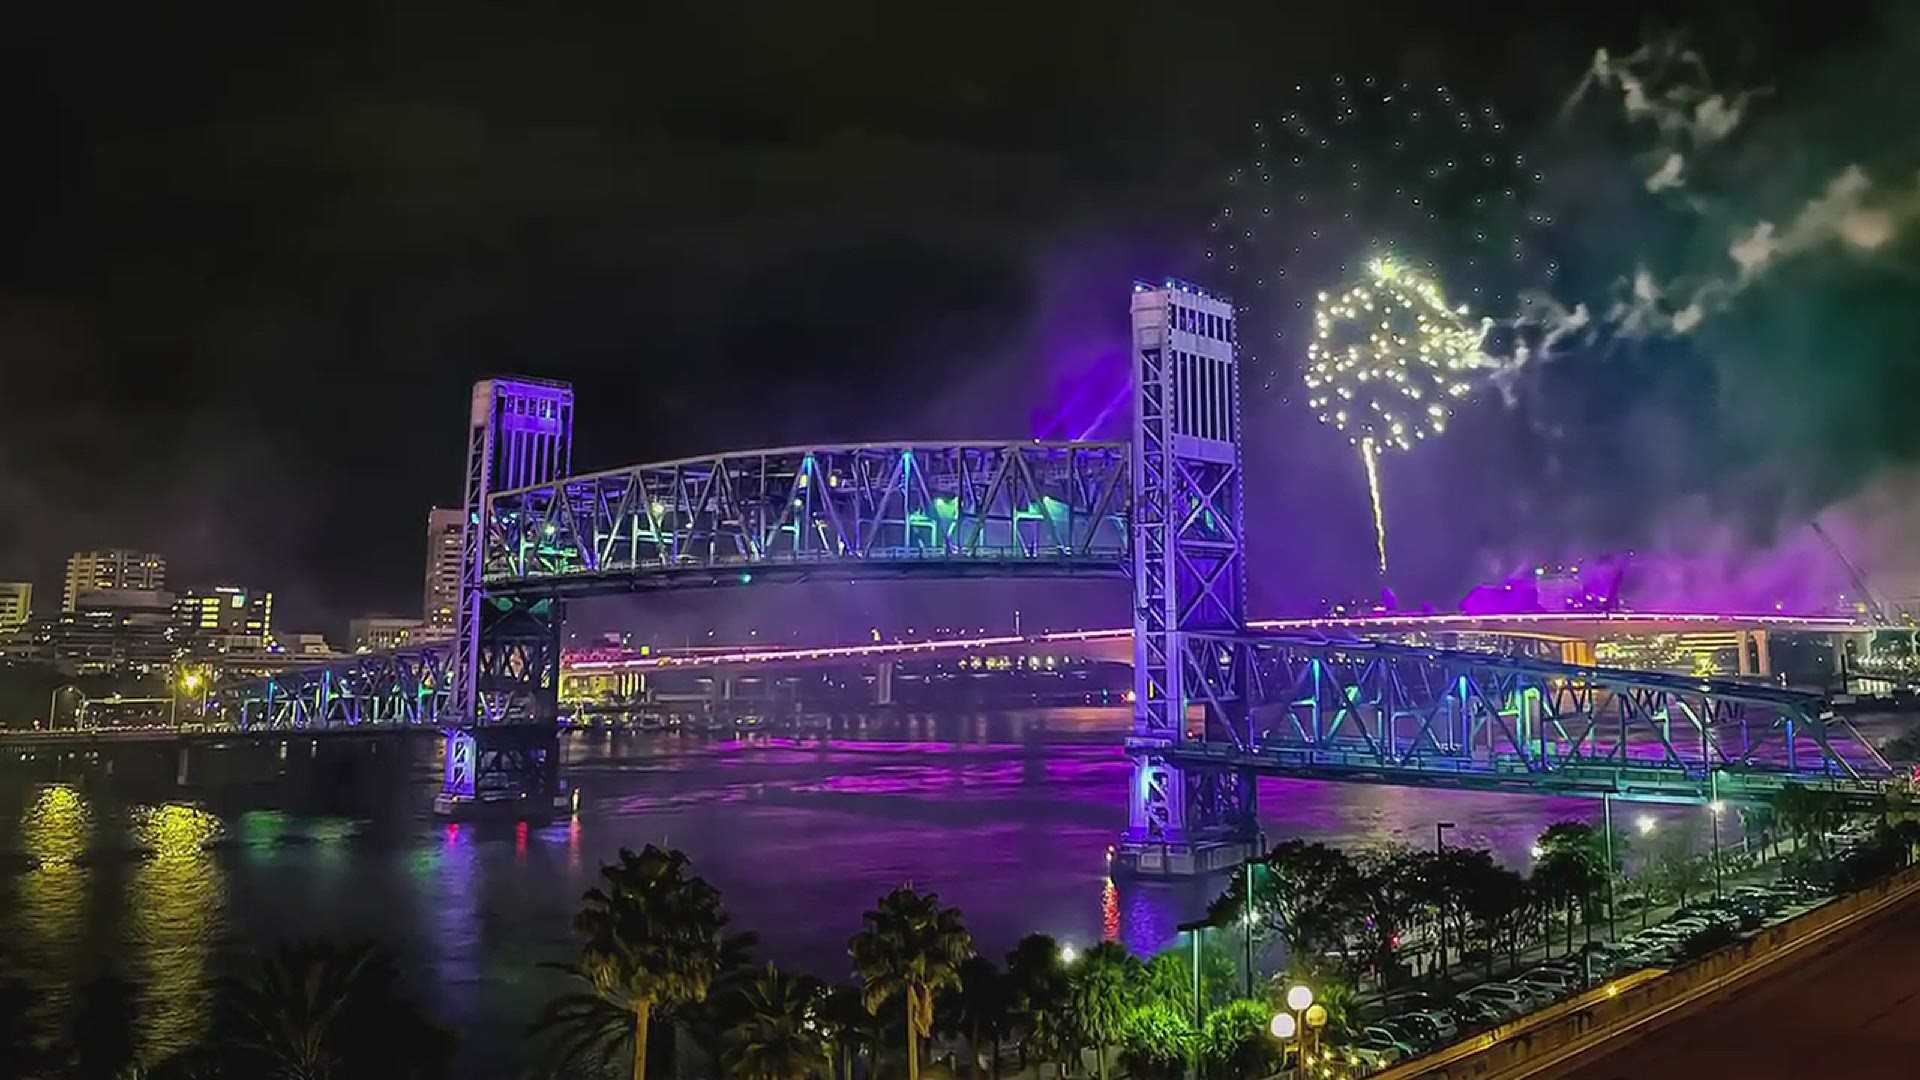 Farewell, 2020! First Coast News Photojournalist Jerry McGovern captured these photos of the fireworks over Downtown Jacksonville to ring in 2021.